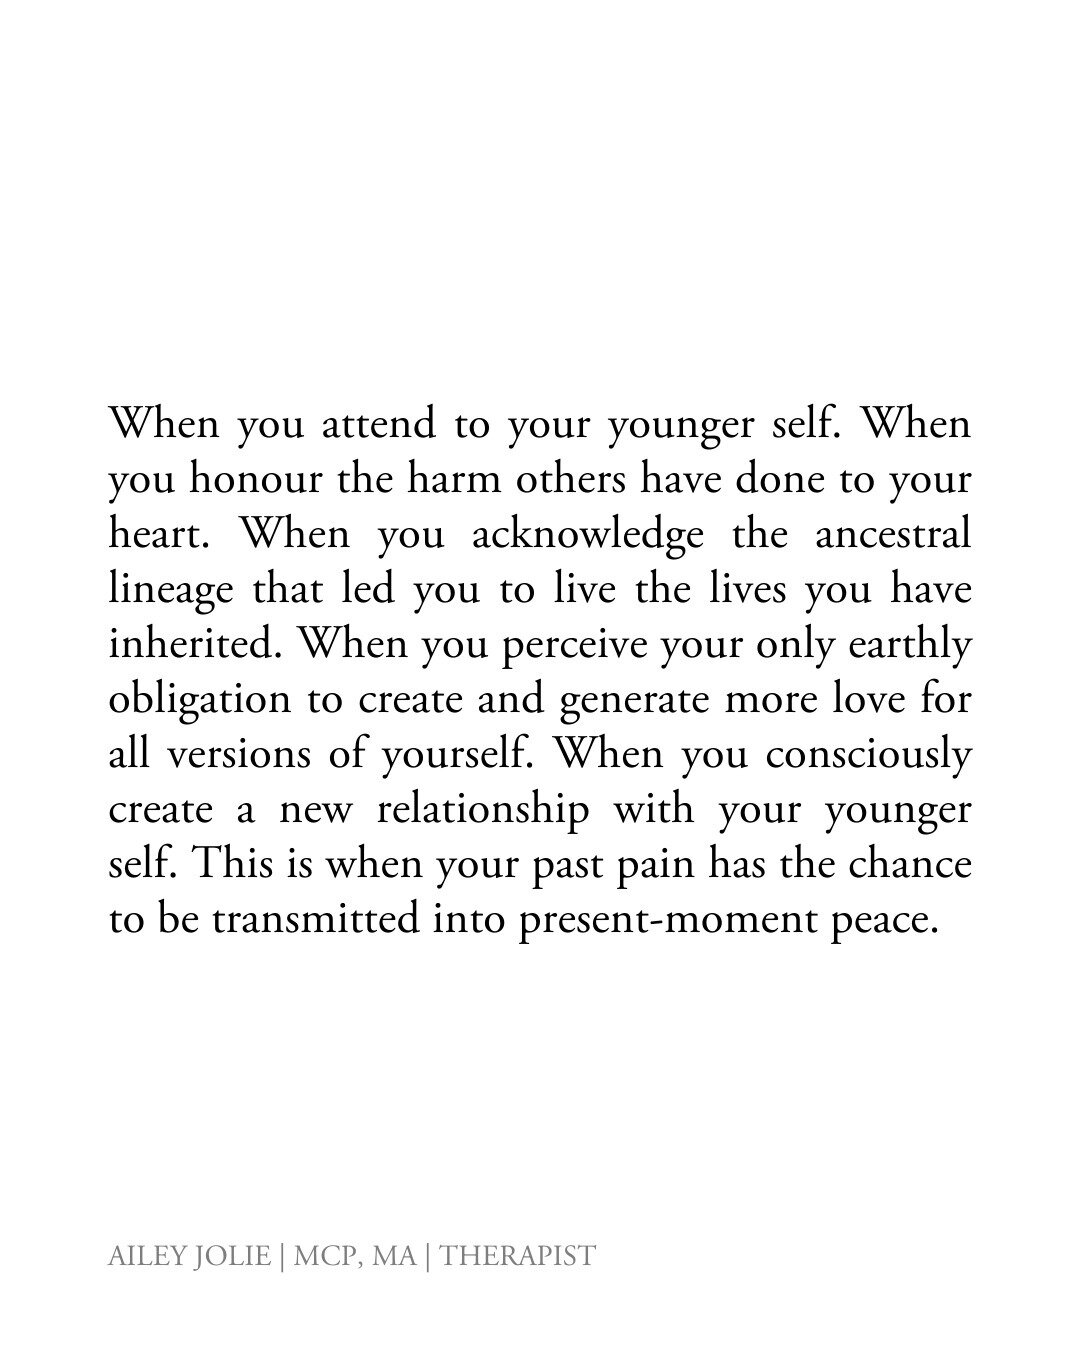 When you attend to your younger self. When you honour the harm others have done to your heart. When you acknowledge the ancestral lineage that led you to live the lives you have inherited. When you perceive your only earthly obligation to create and 